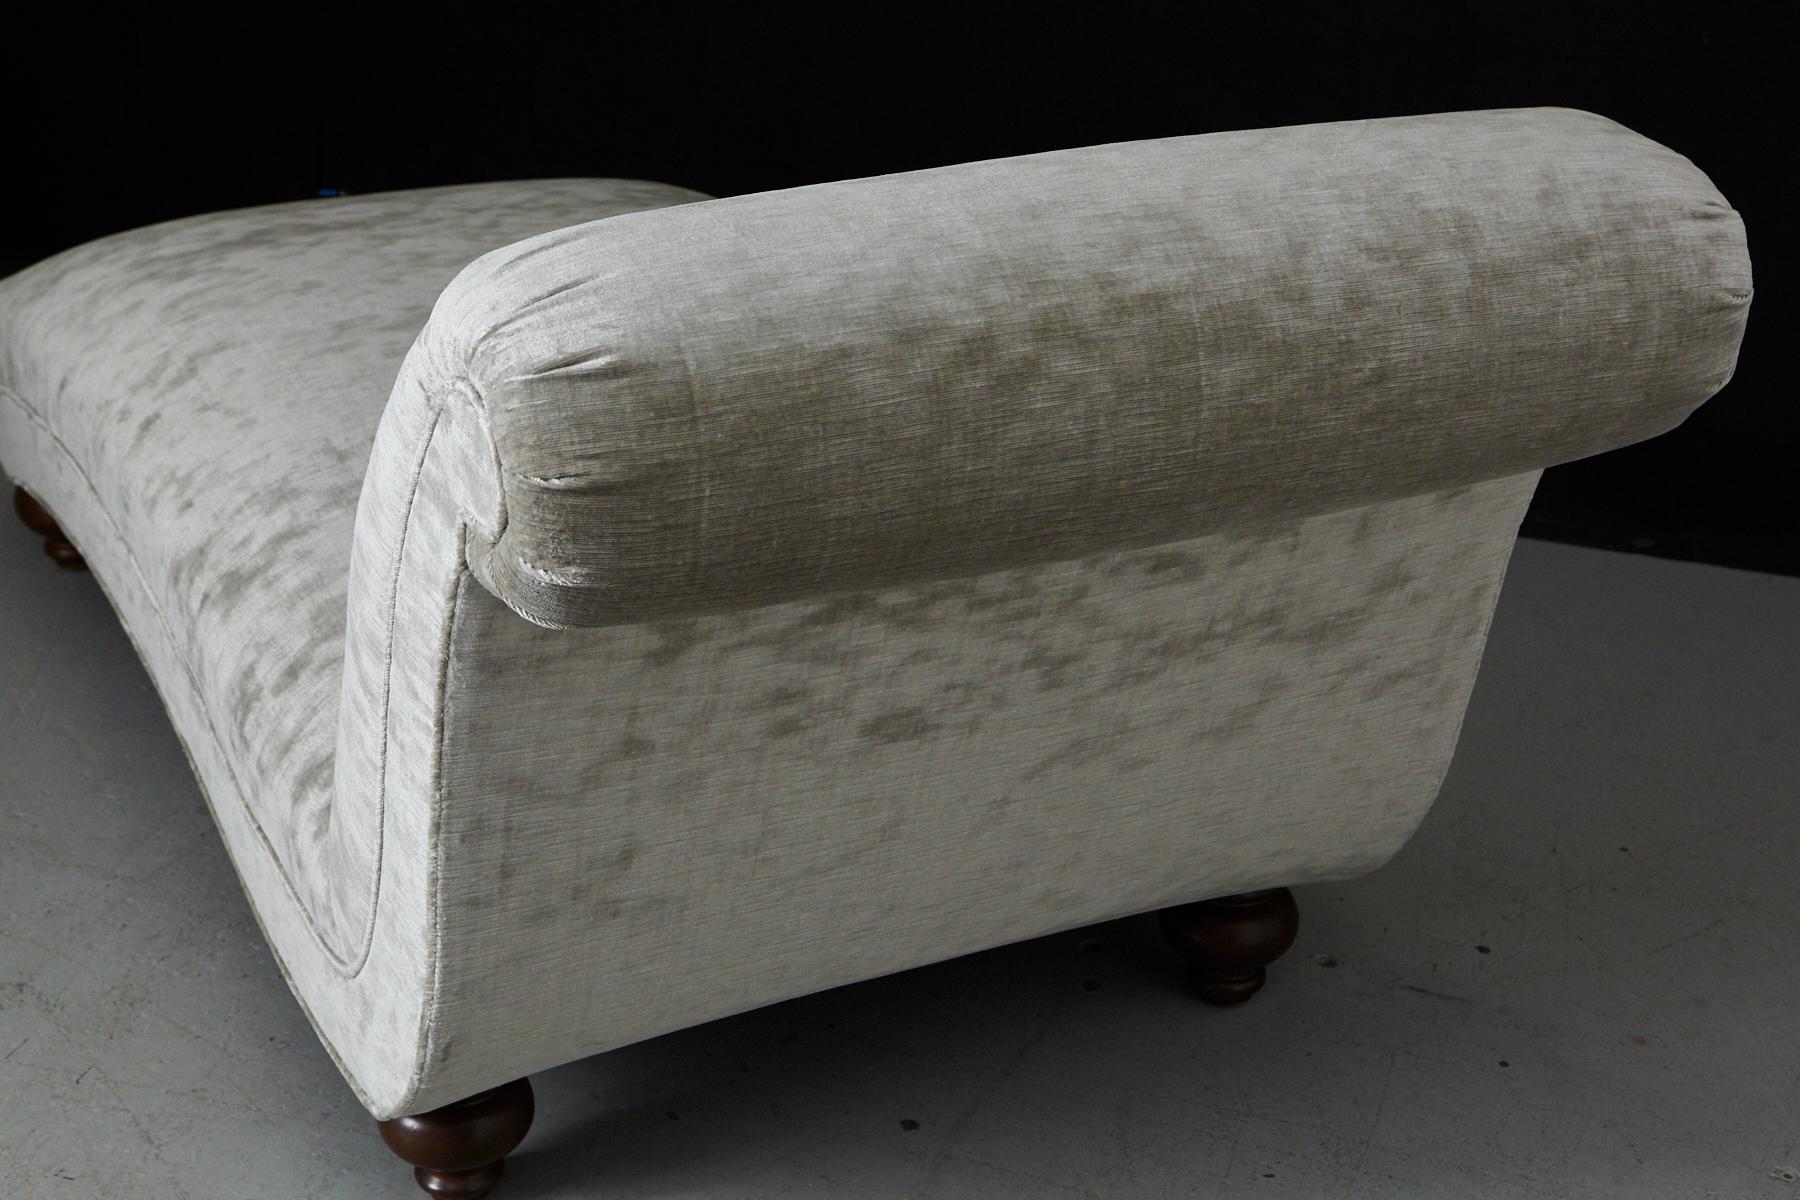 French Chaise Longue with New Upholstery in Striae Velvet, circa 1930s For Sale 8